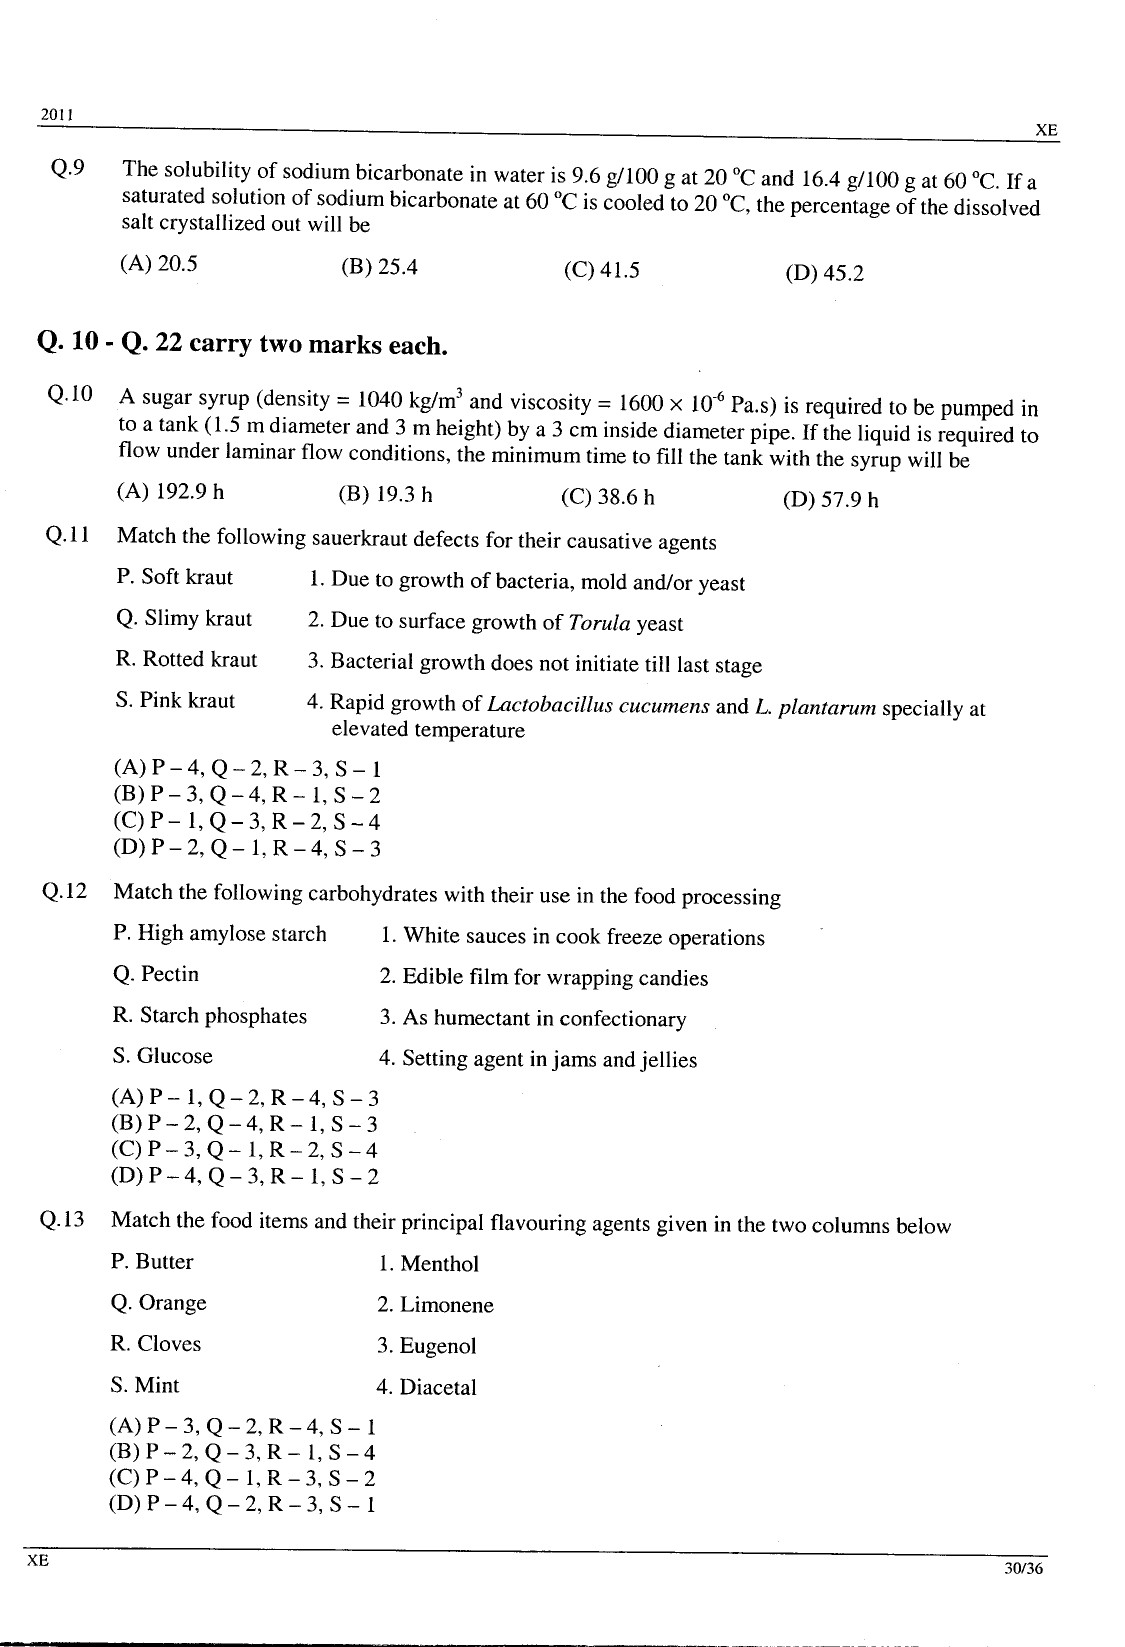 GATE Exam Question Paper 2011 Engineering Sciences 30